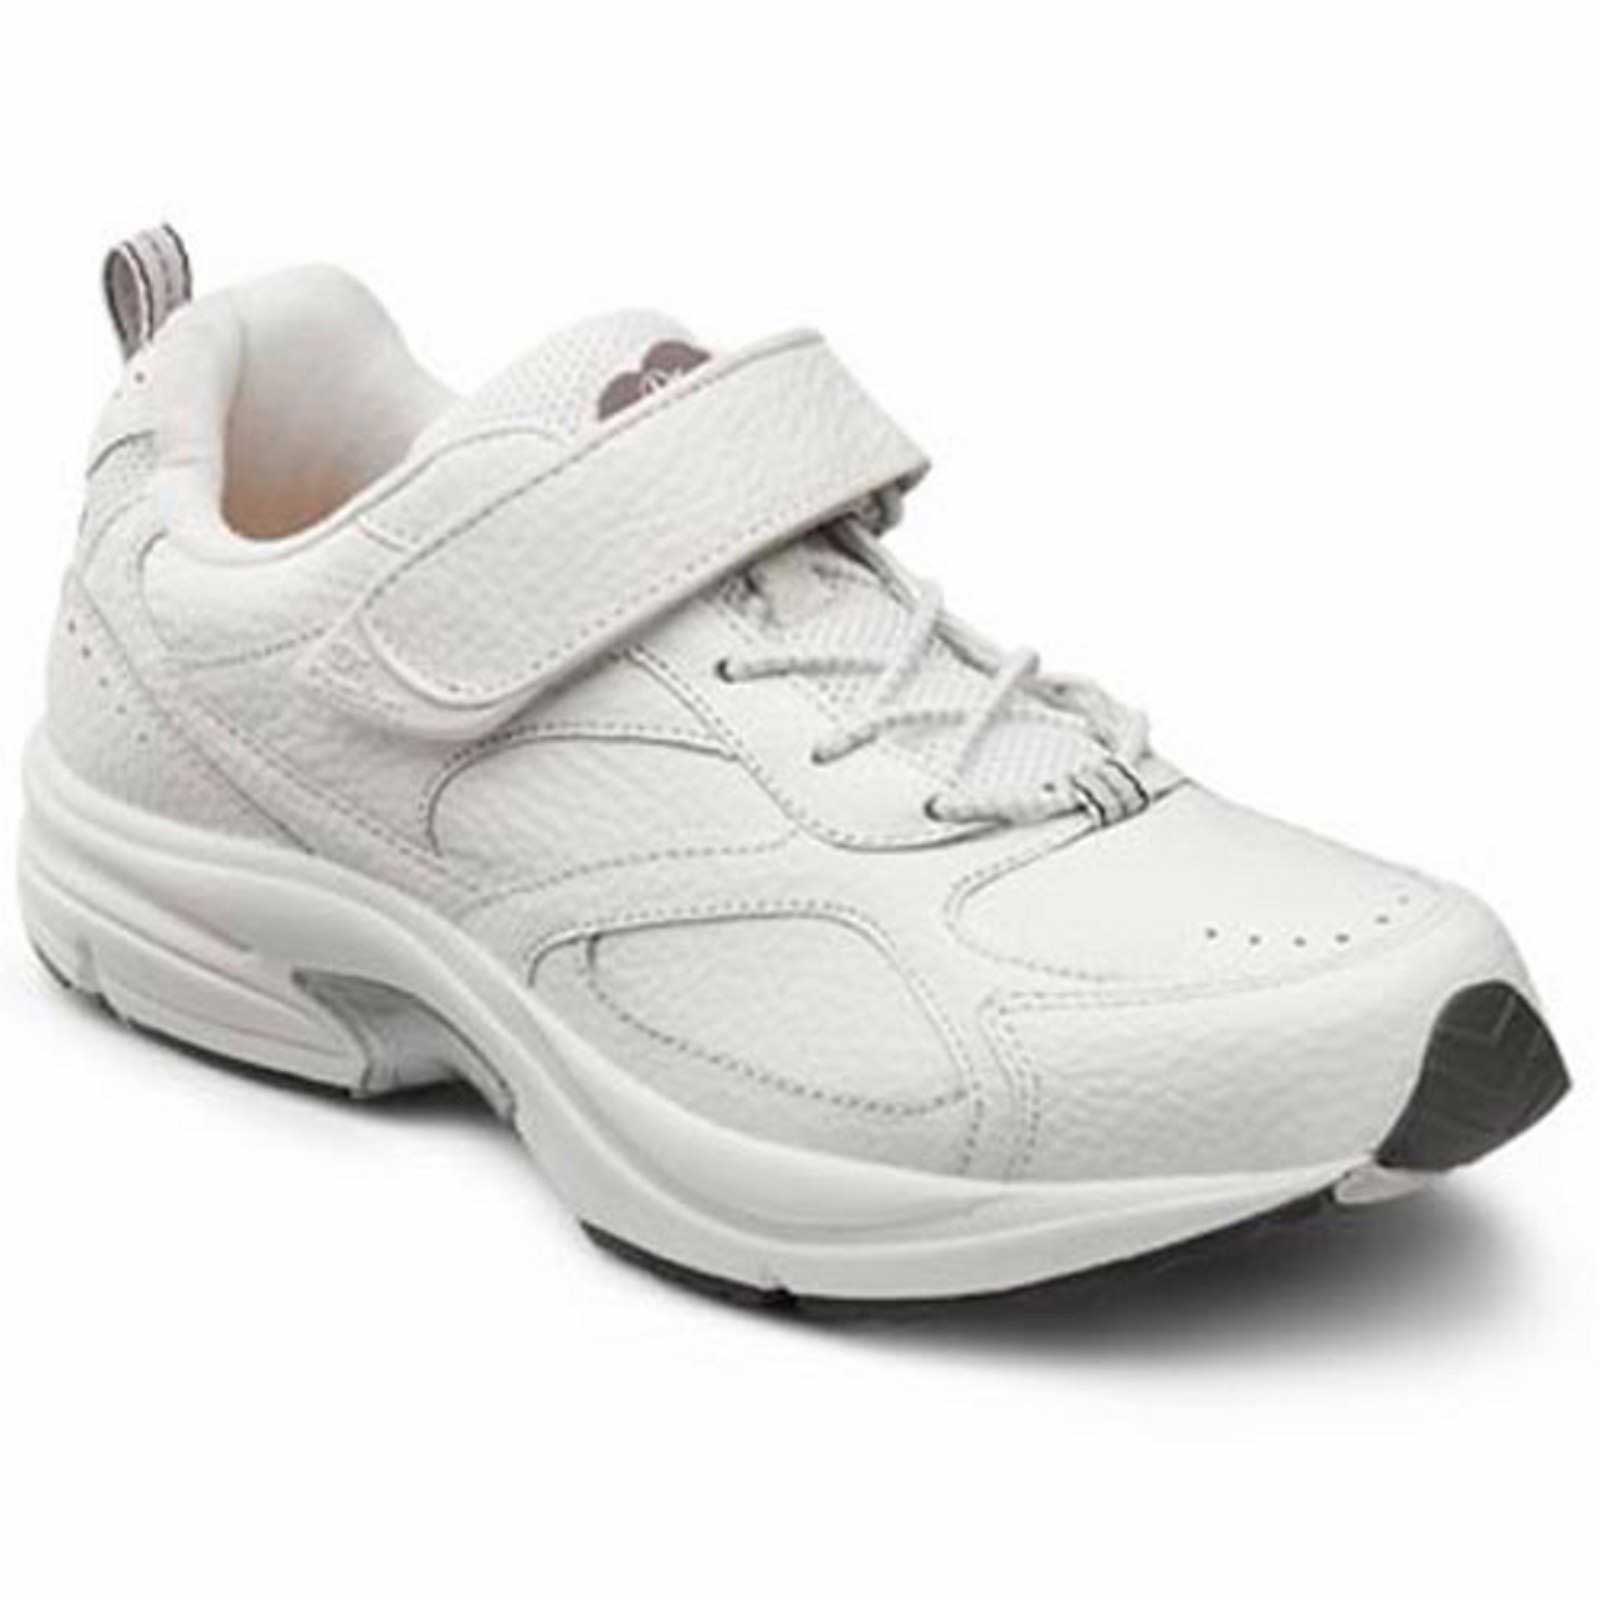 Men's Champion Sneakers & Athletic Shoes